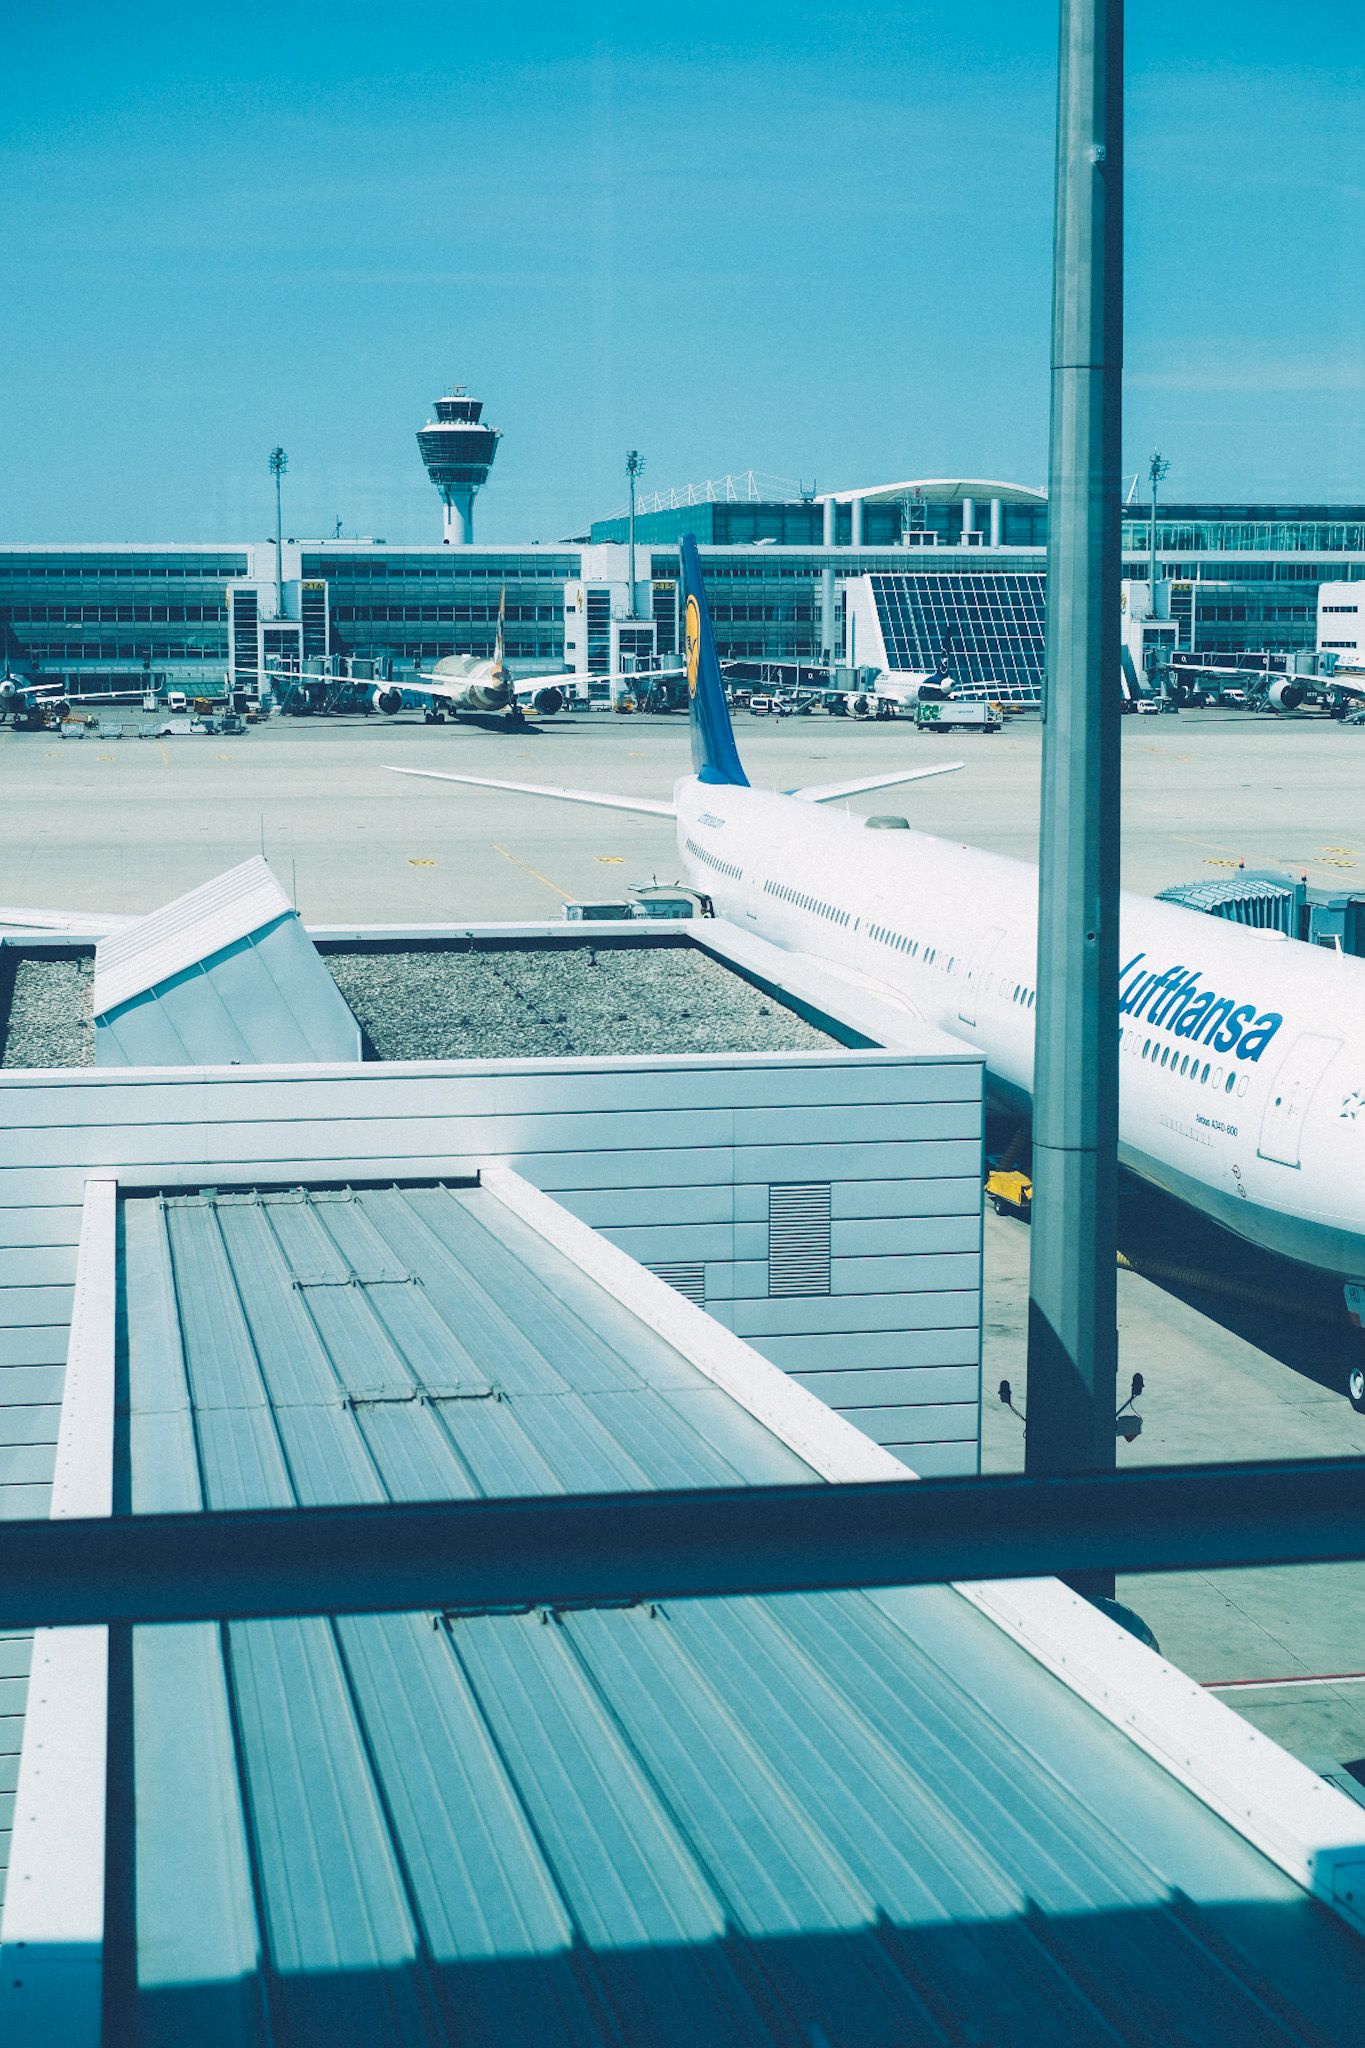 The view from a window of the Munich airport, staring out onto other terminals, grey pavement, a Lufthansa plane.